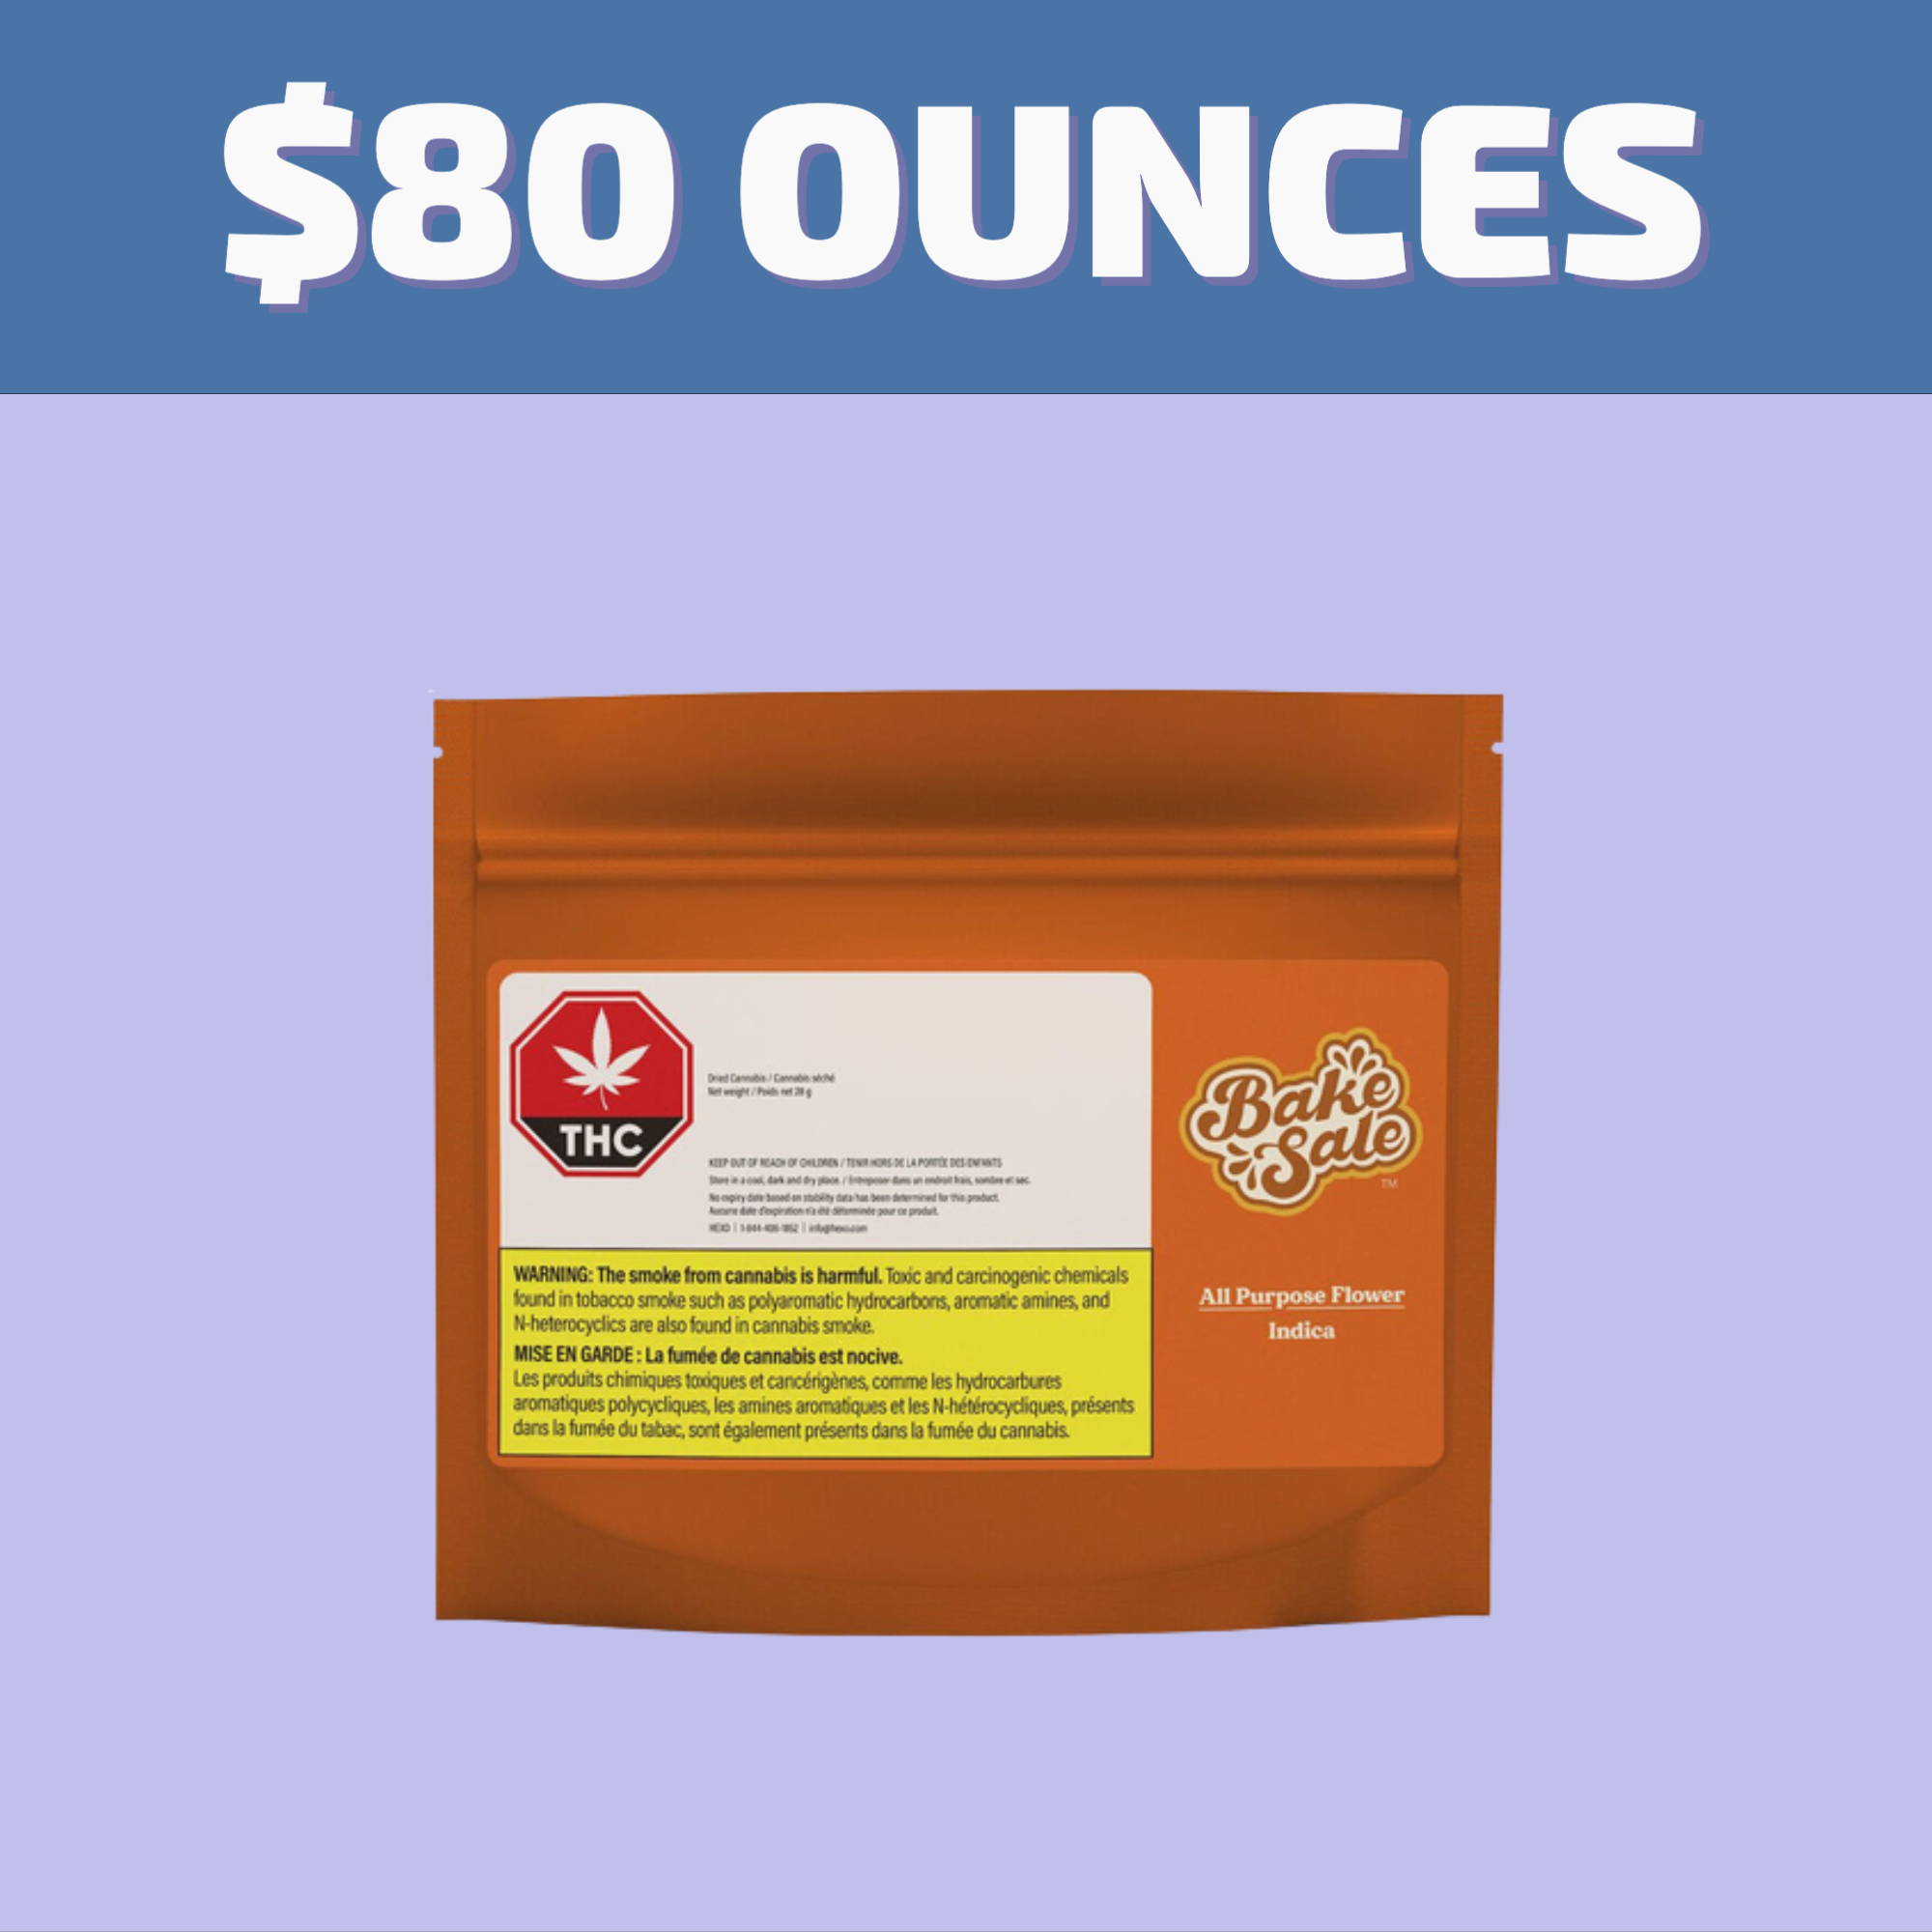 Buy Cheap Ounces of Weed in Winnipeg and have an $80 ounce of weed delivered same day, pick up in-store, or have it shipped Canada Post.